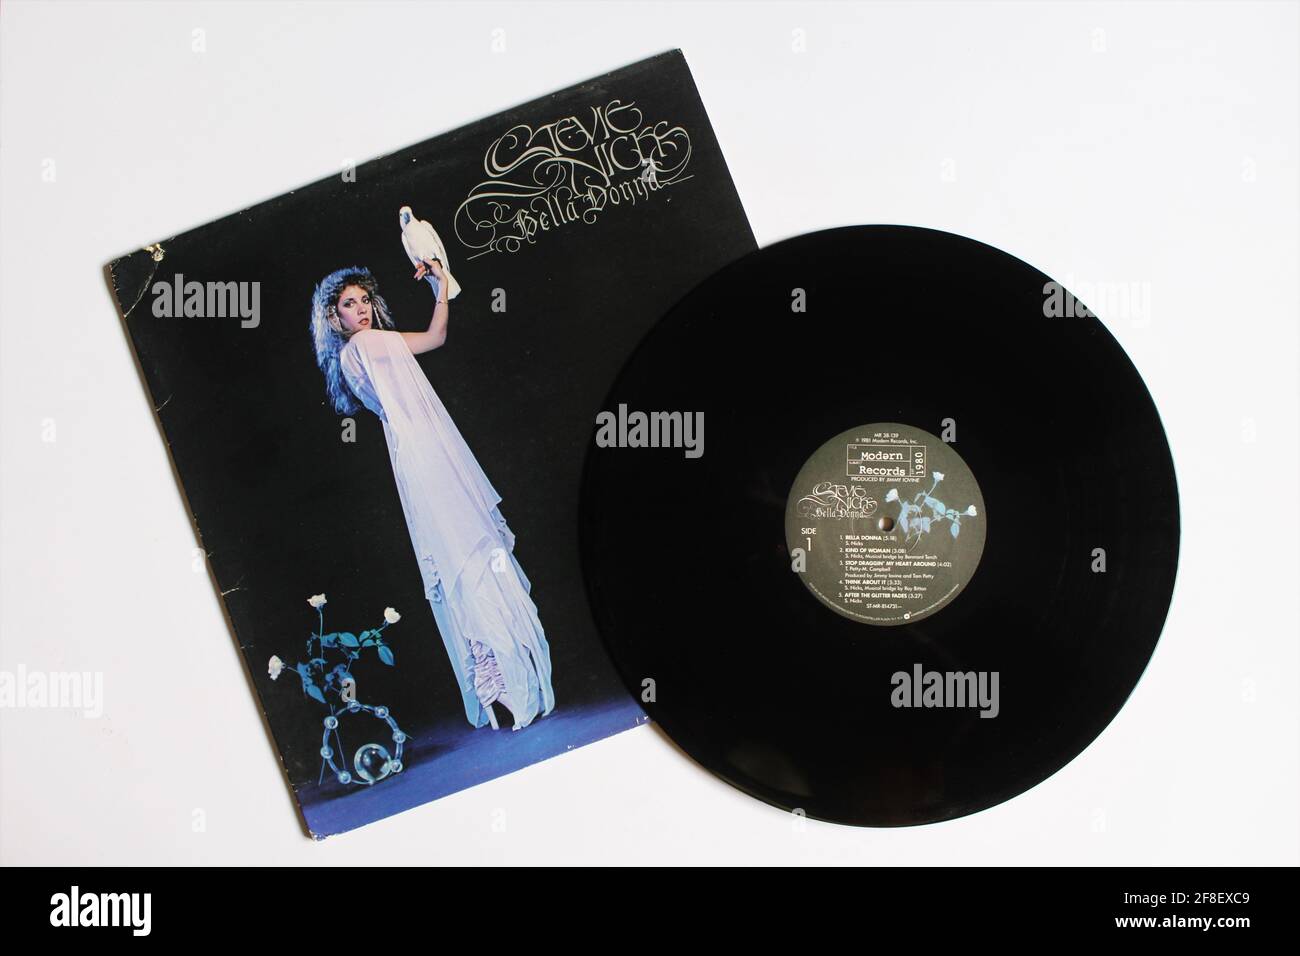 Rock and country rock artist, Stevie Nicks music album on vinyl record LP disc. Titled: Bella Donna Stock Photo